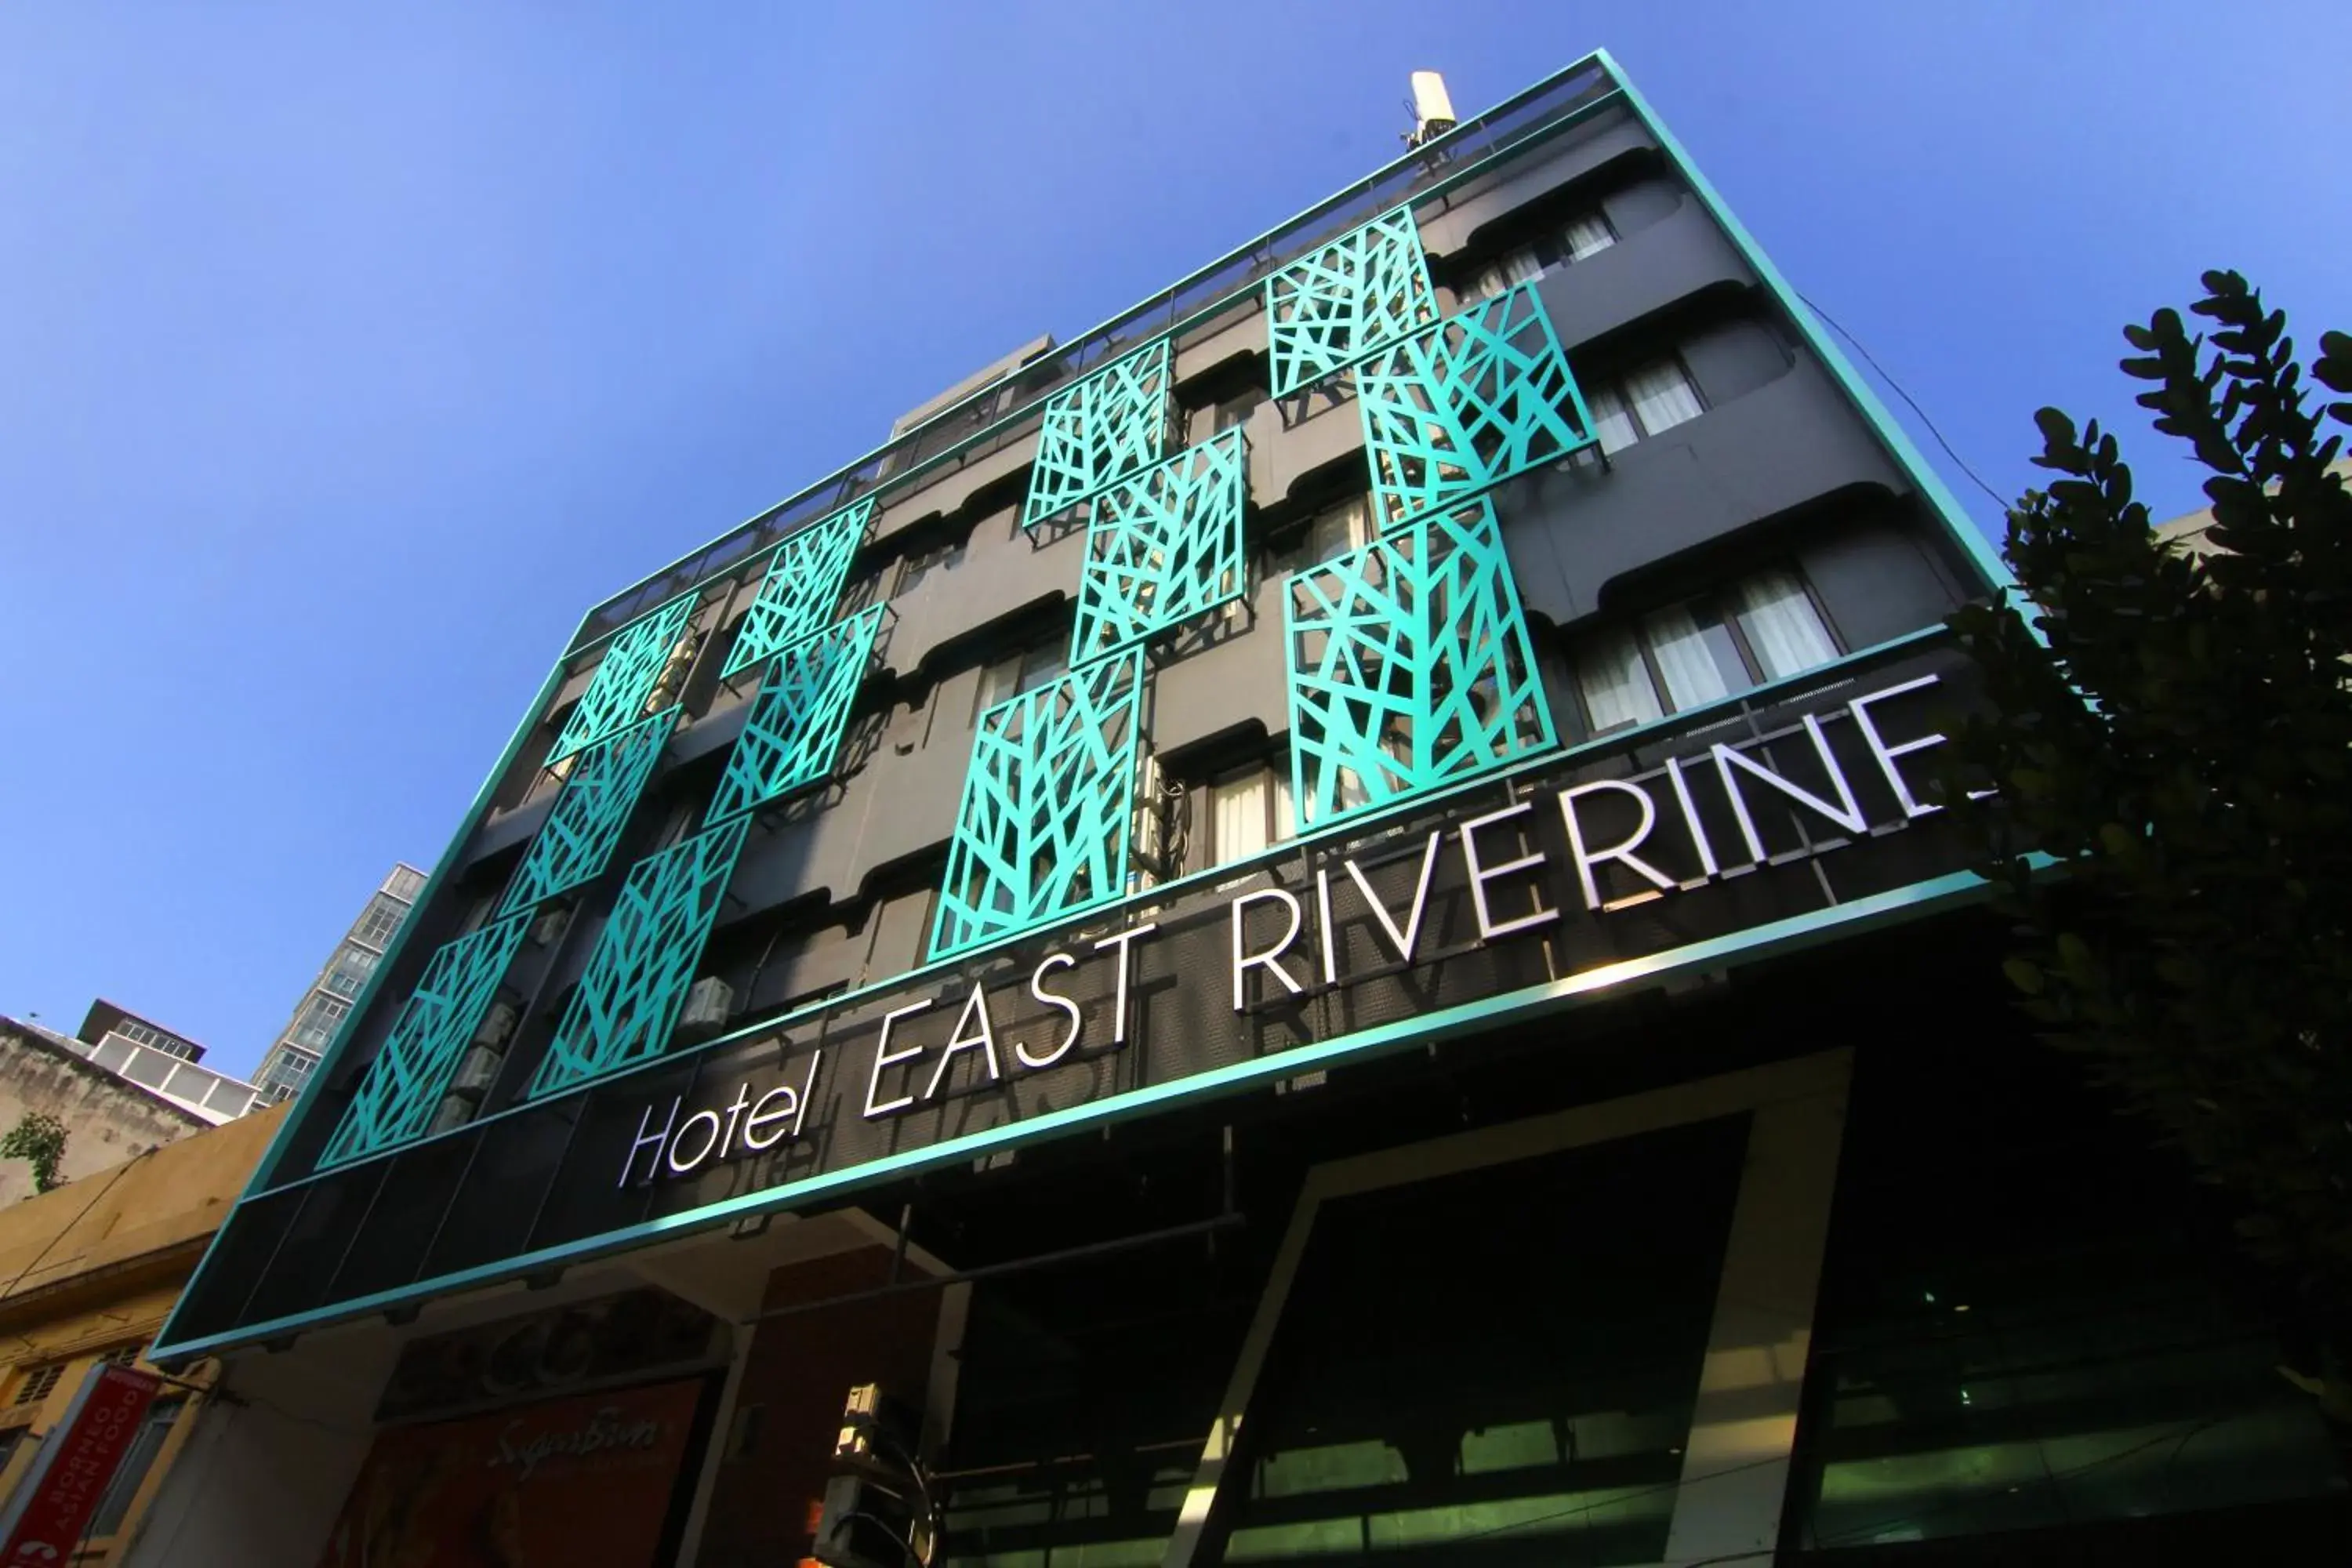 Property Building in East Riverine Boutique Hotel